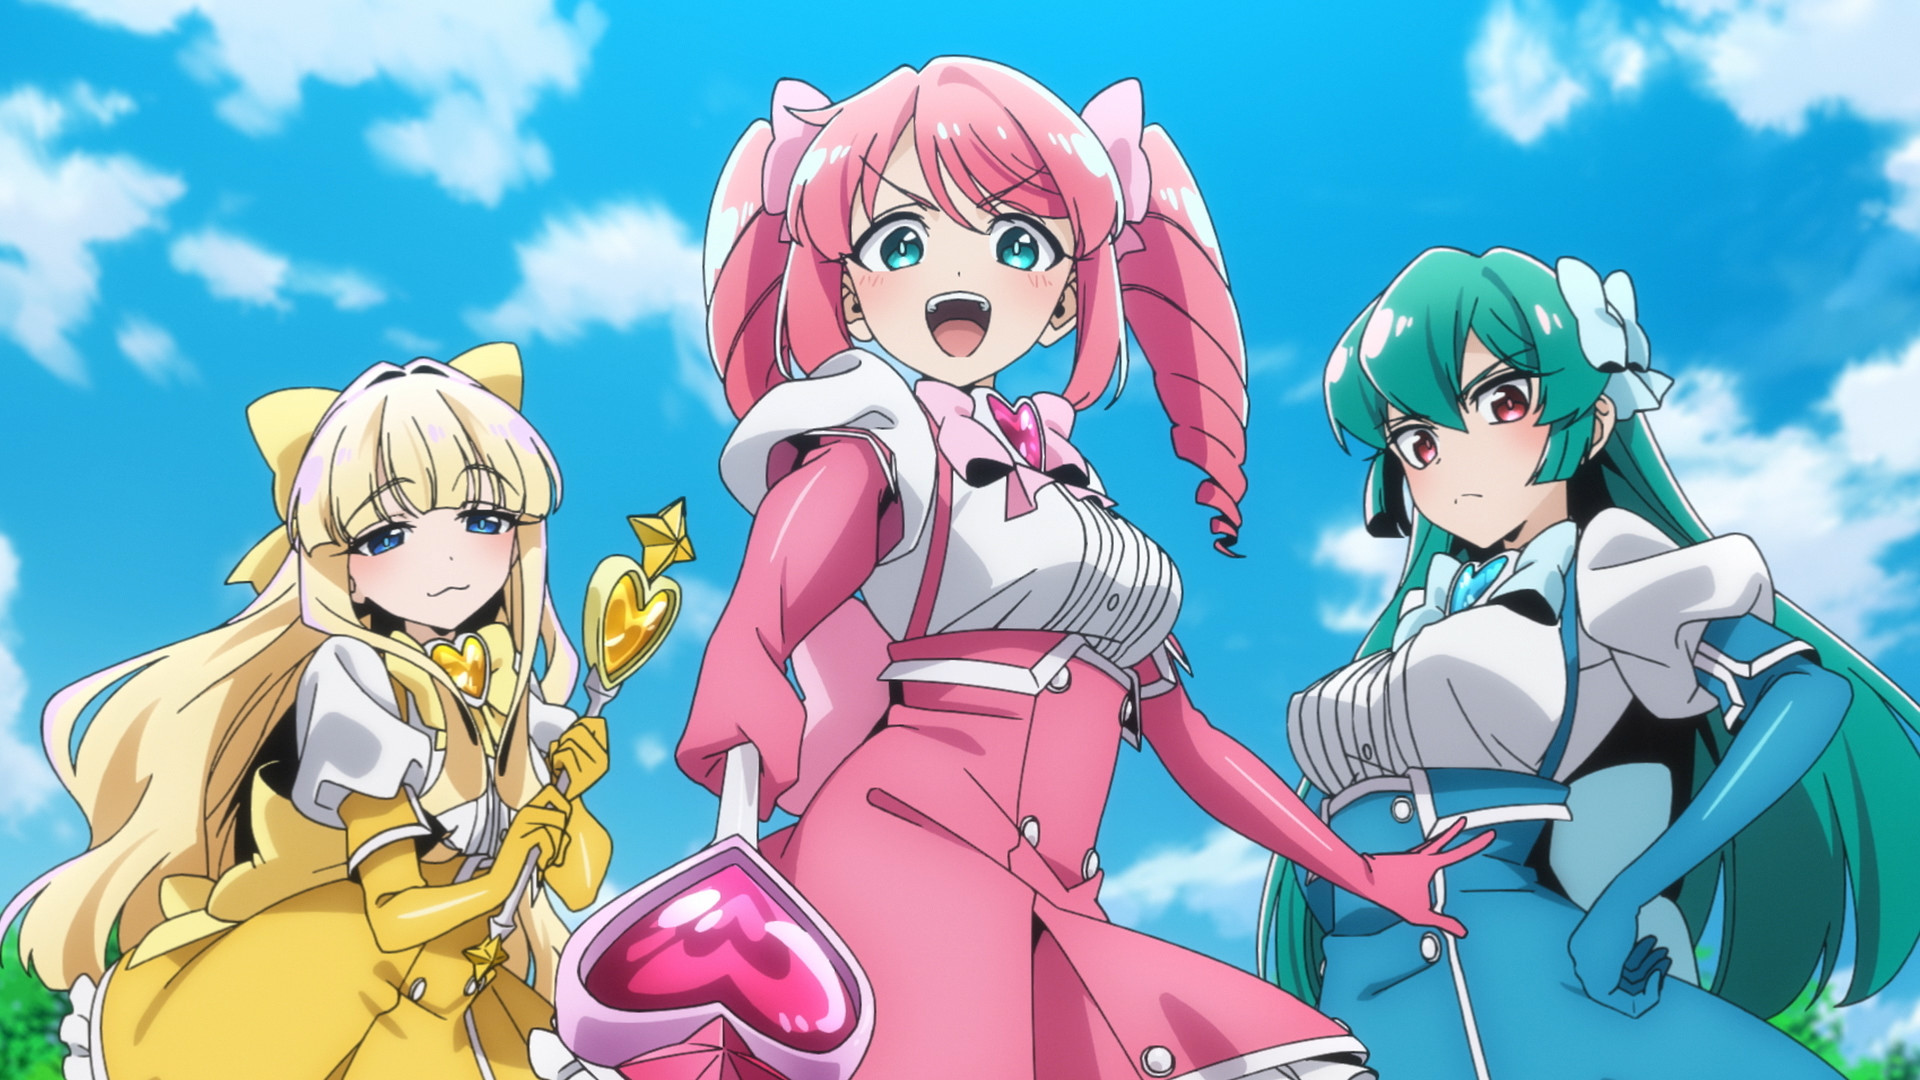 Gushing Over Magical Girls Releases Main Trailer and Visual, Premieres Next January